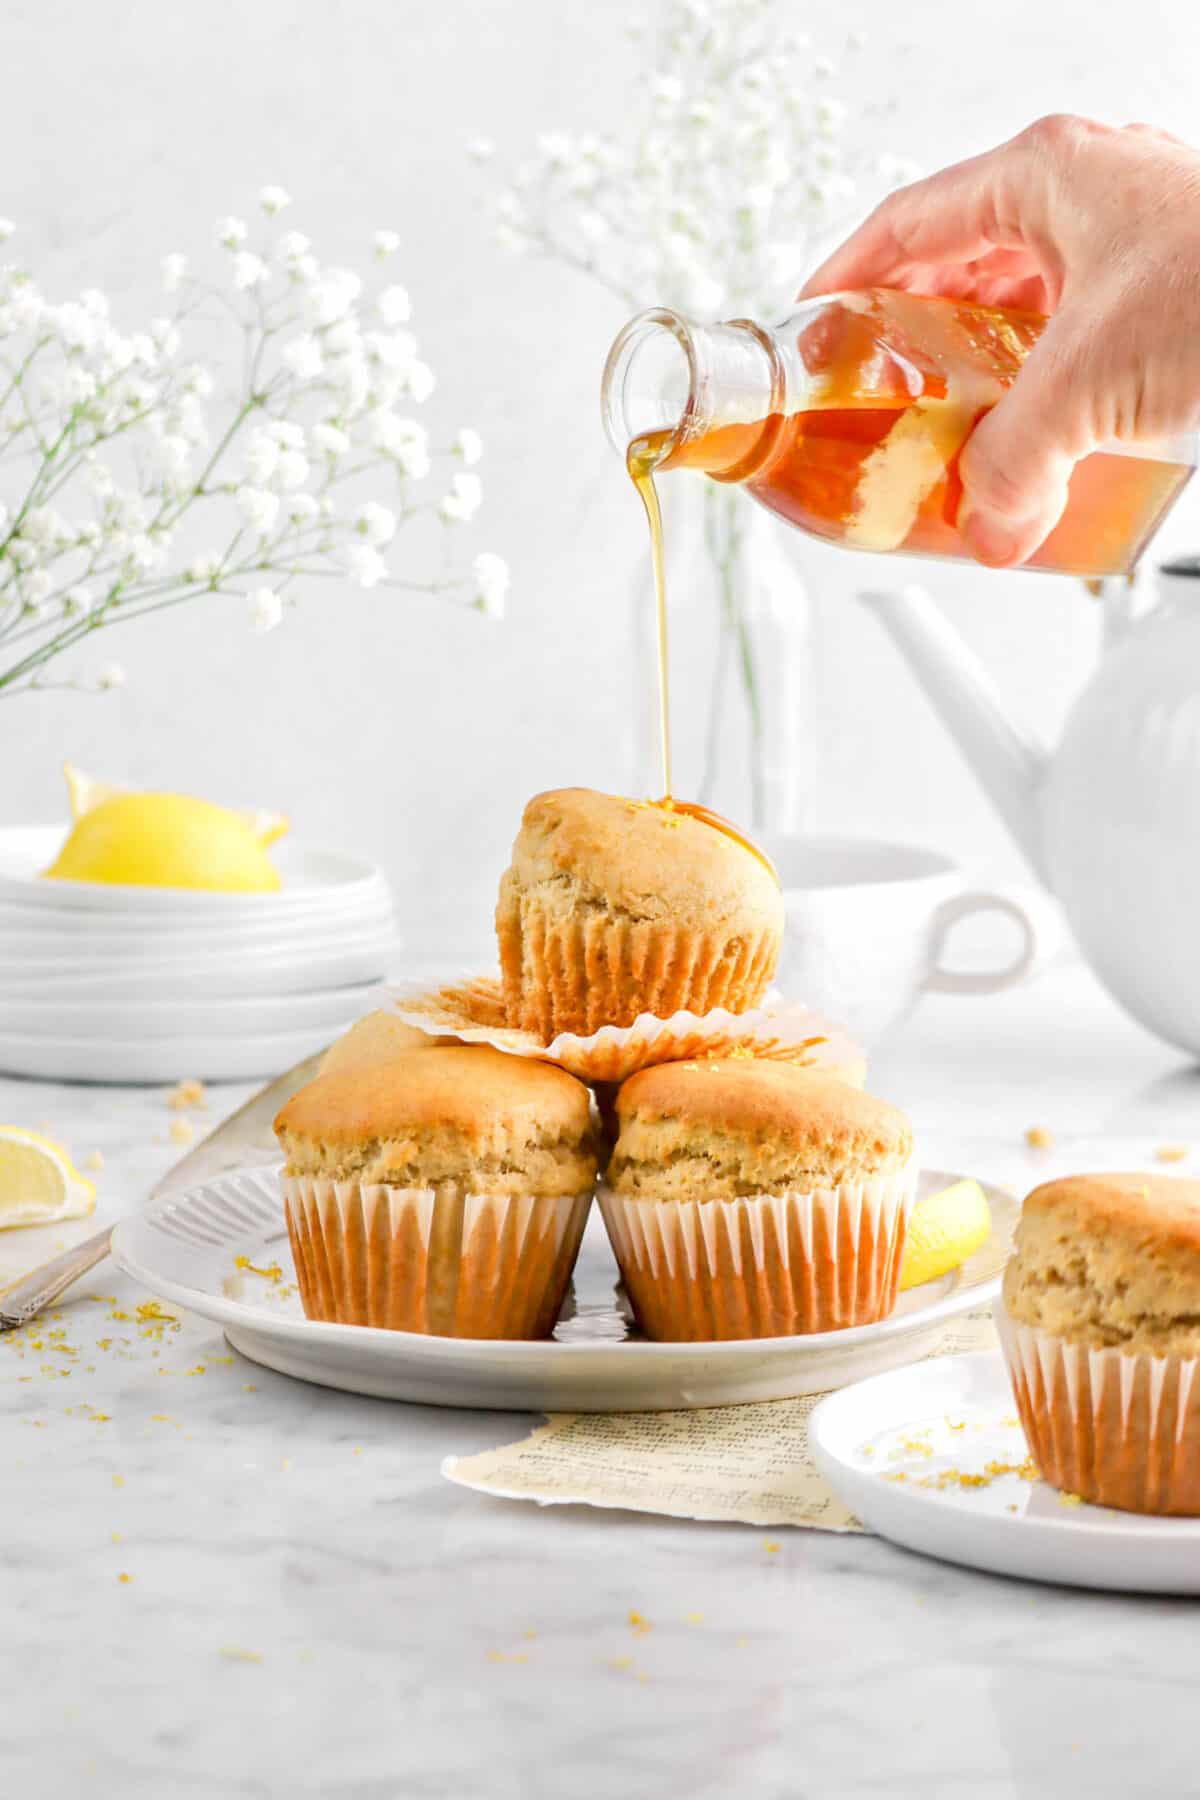 honey being poured onto stack of muffins on white plate with another muffin in front, a stack of paltes behind, flowers, and white teapot